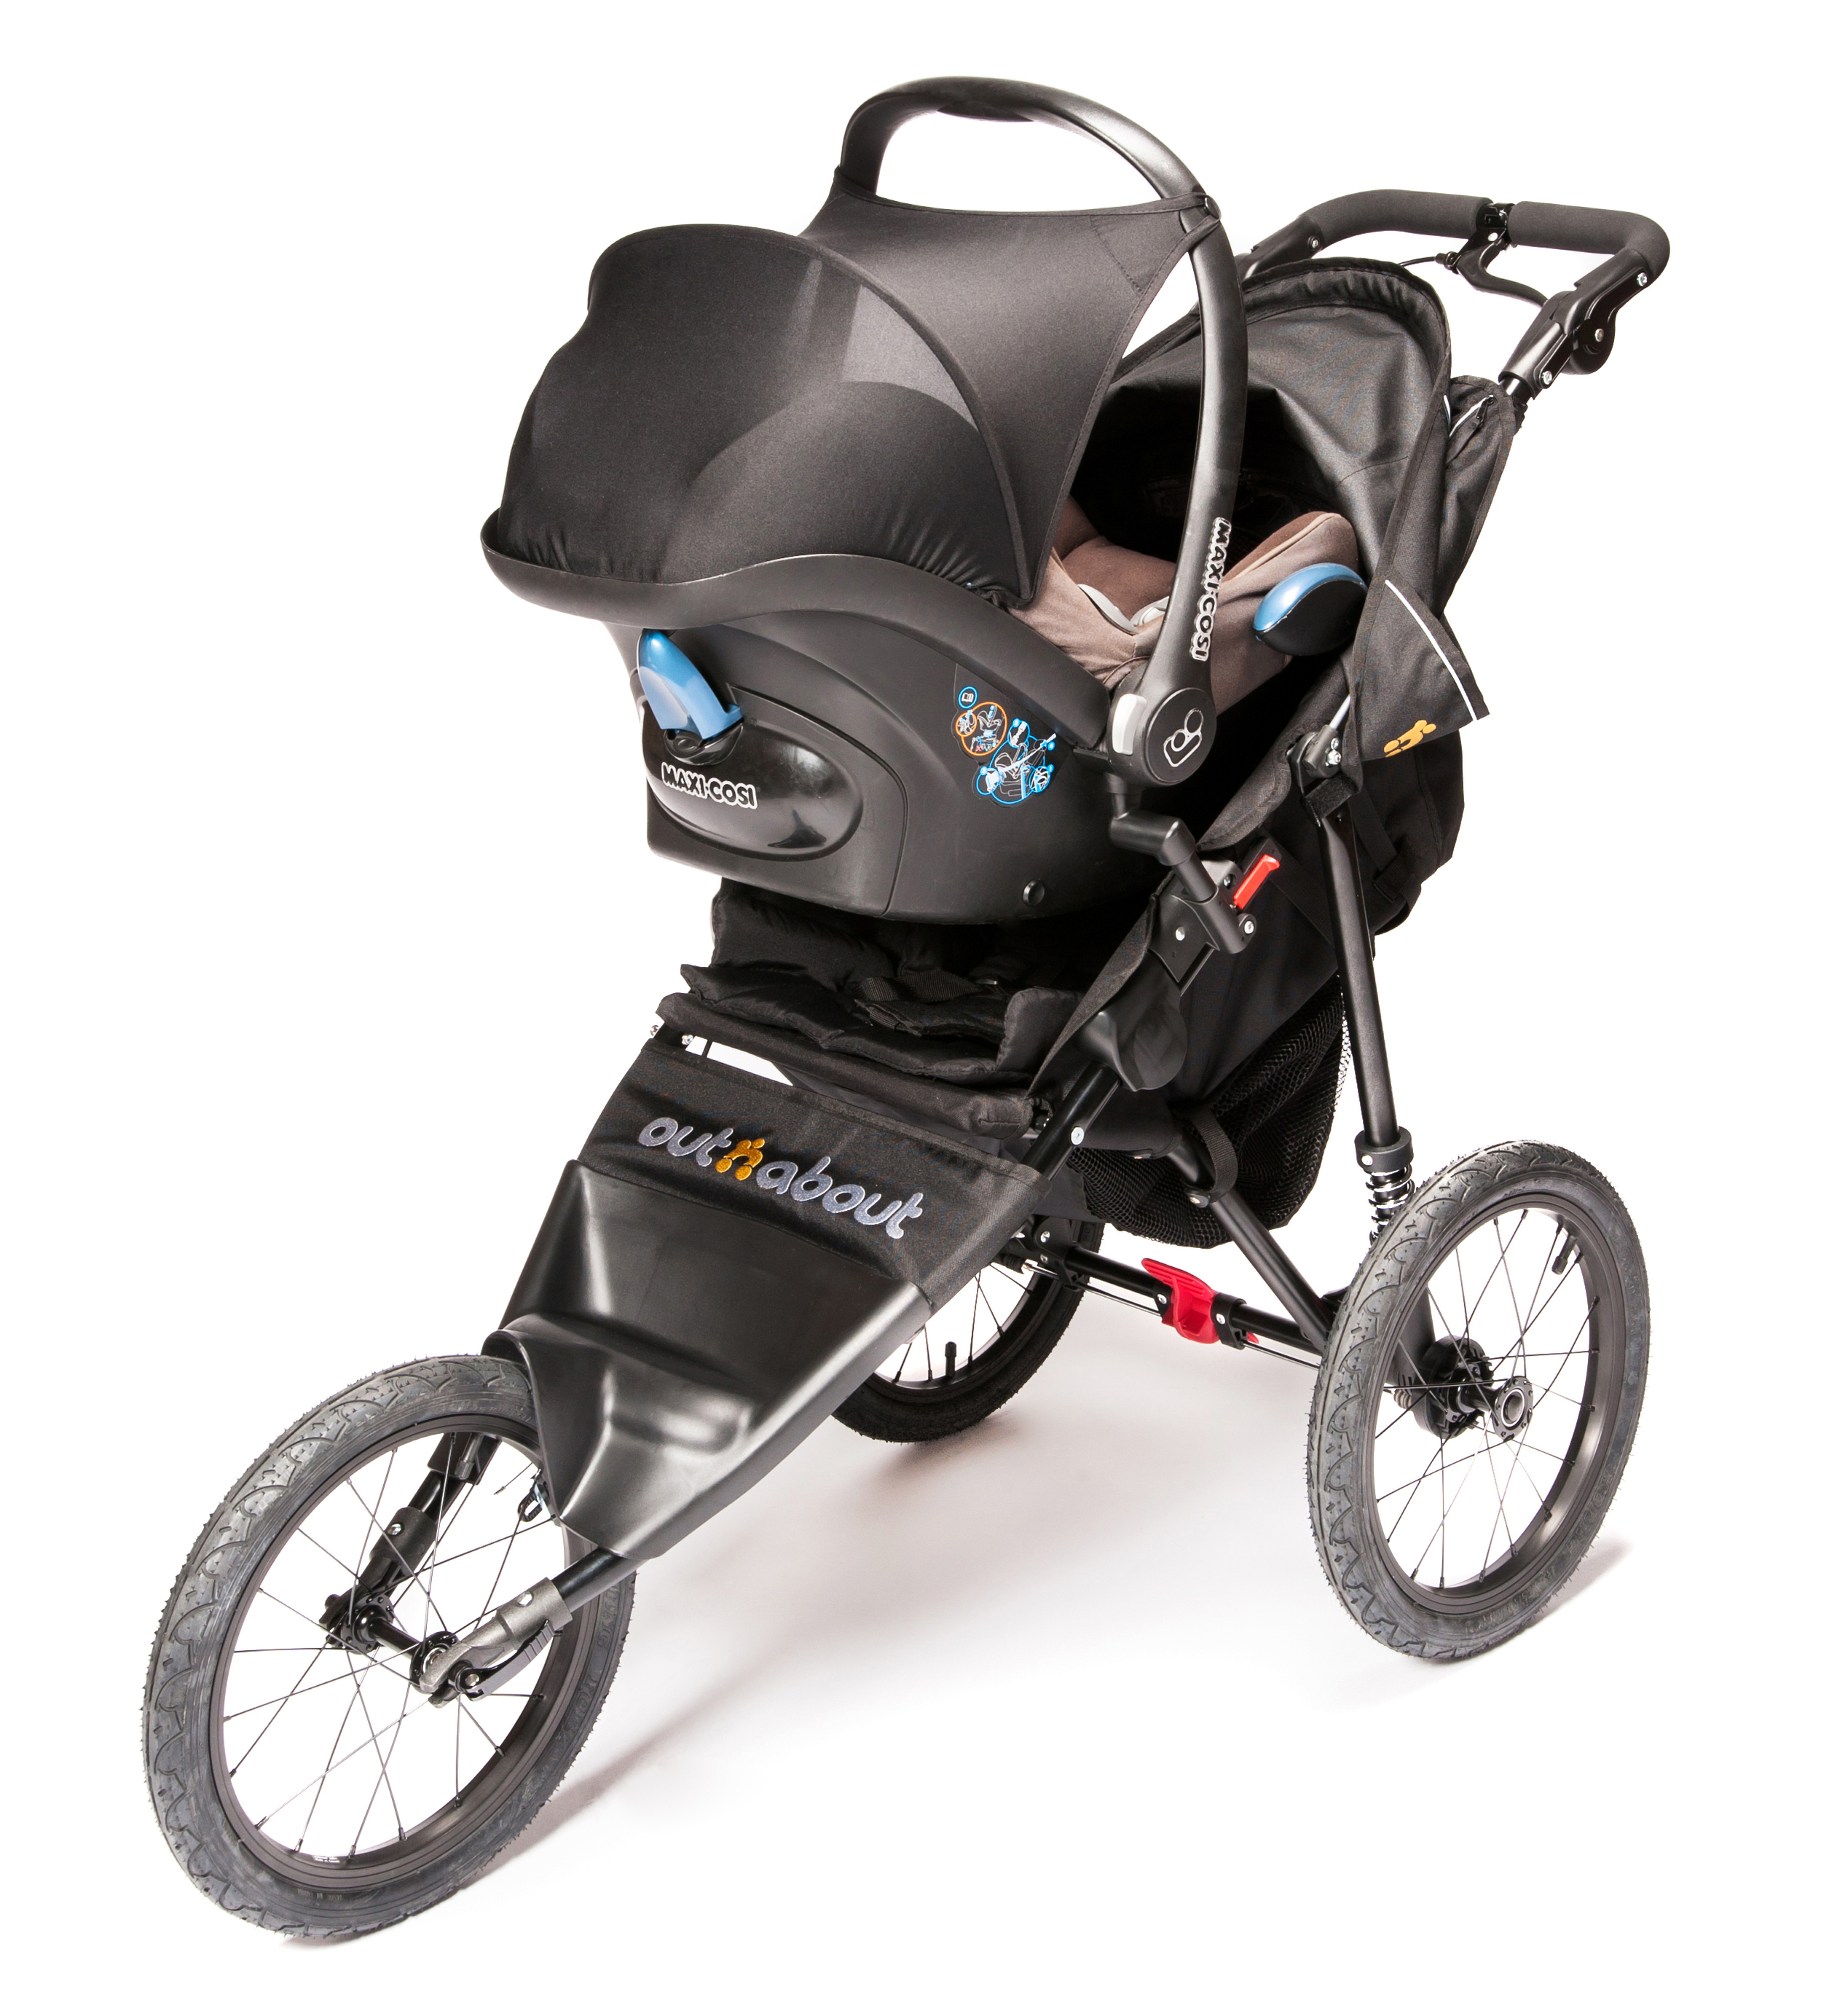 out n about travel system